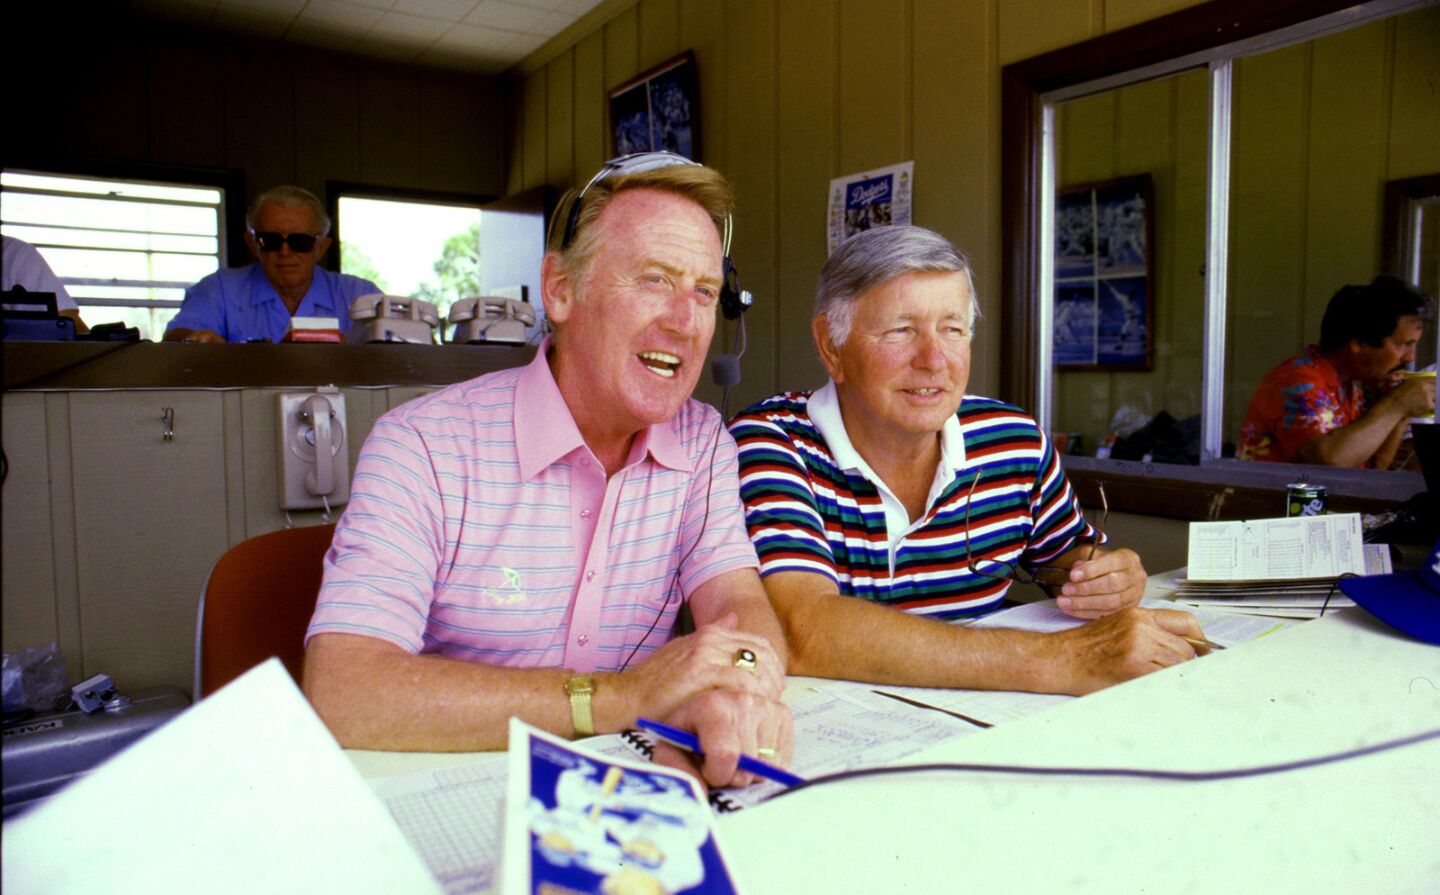 Vin Scully with Jerry Doggett in the announcer's booth at Dodgertown during spring training in Vero Beach, Florida on April 8, 1985.